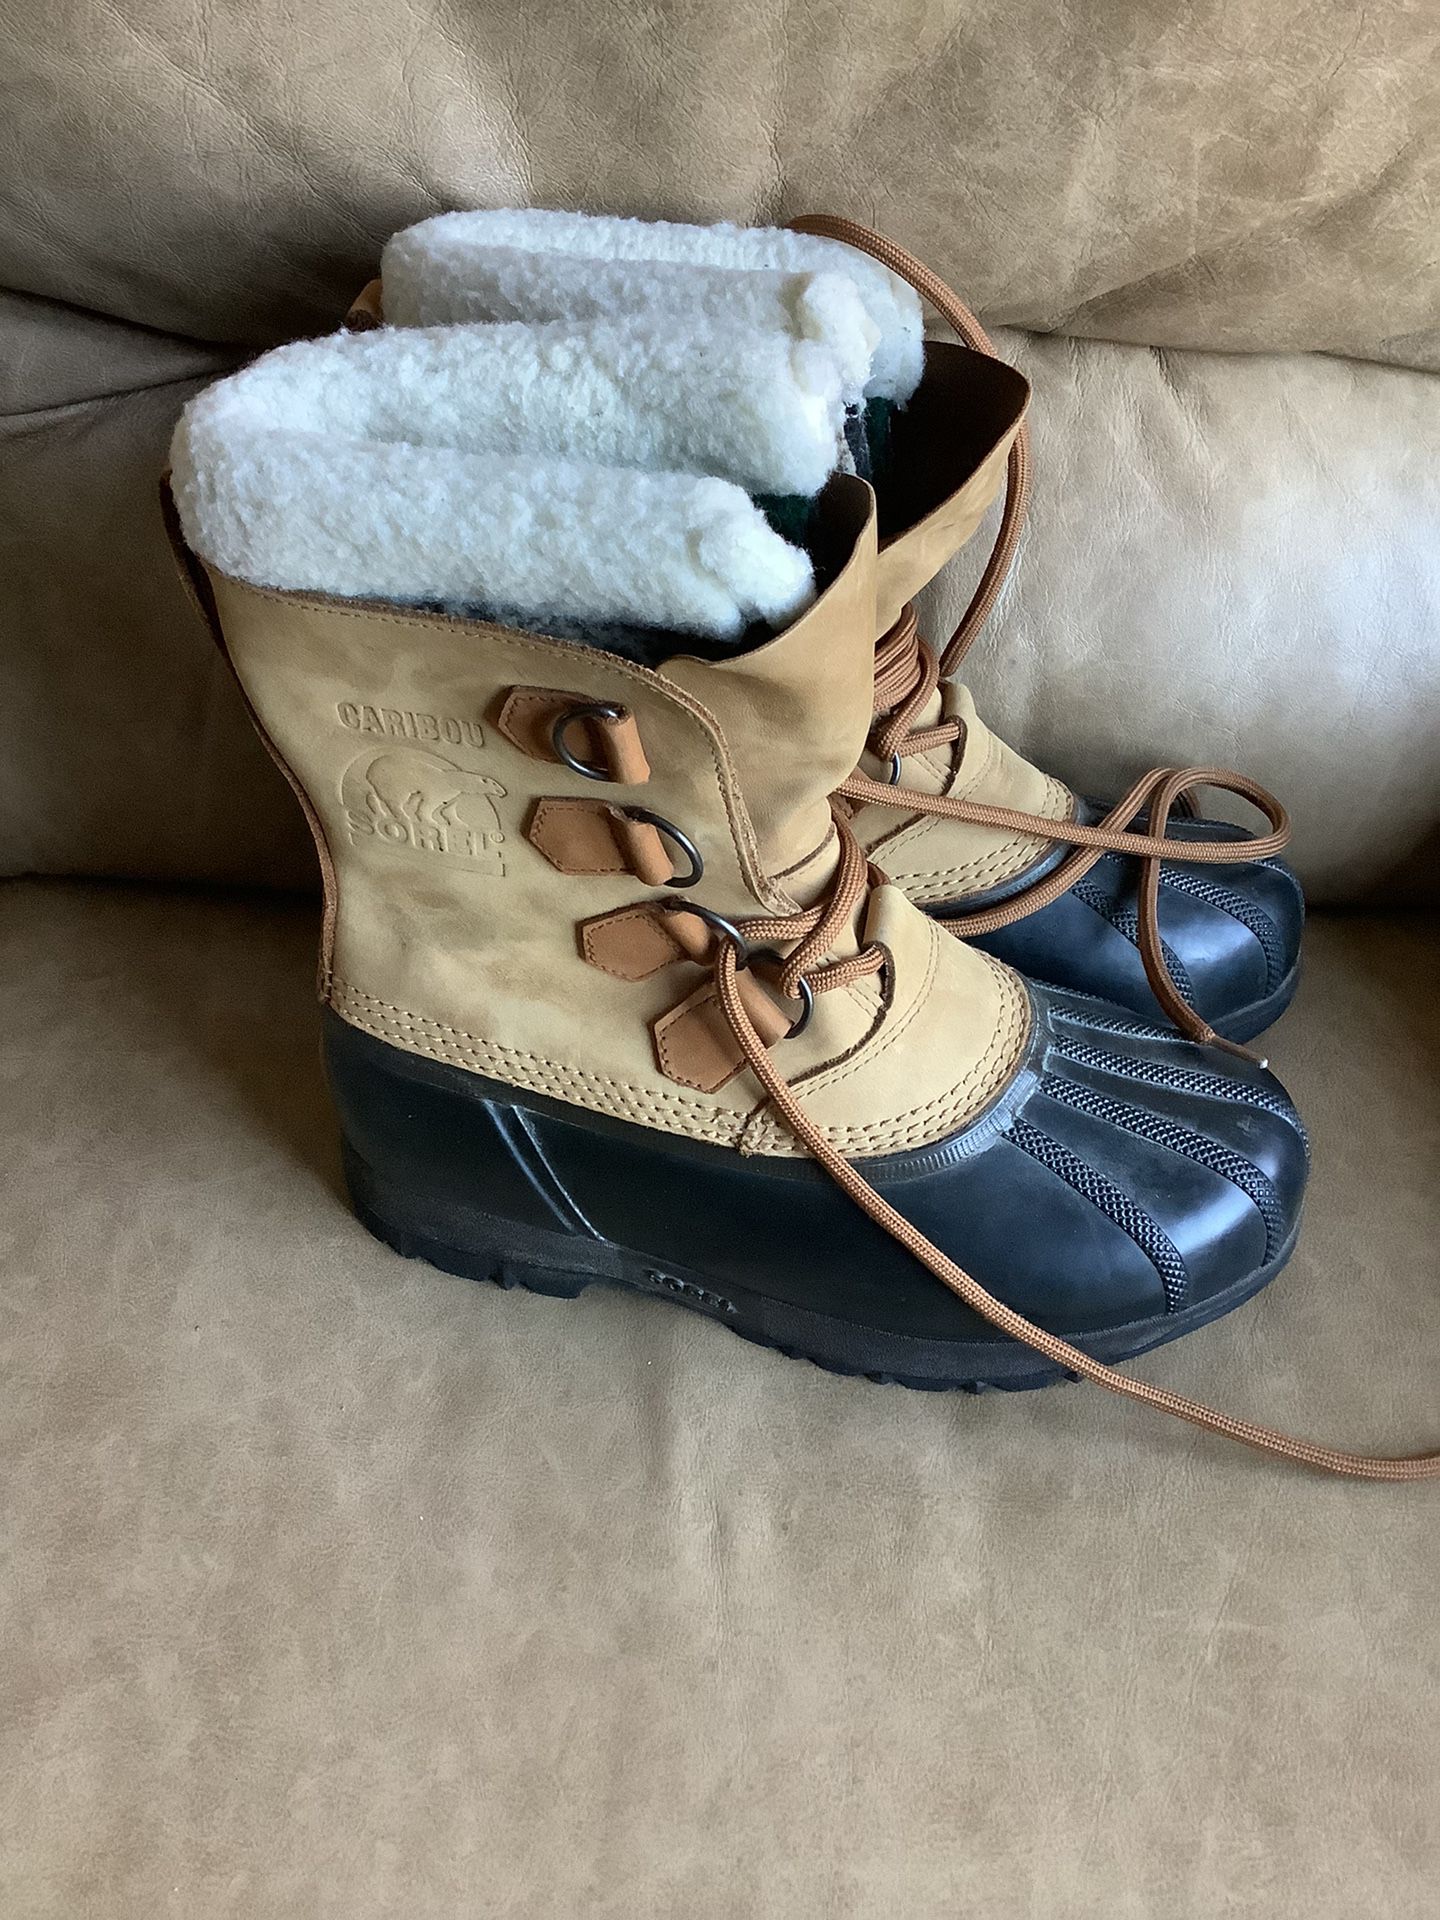 Sorel Caribou Adult Water Proof Snow Boots Us Size7 Eur 30